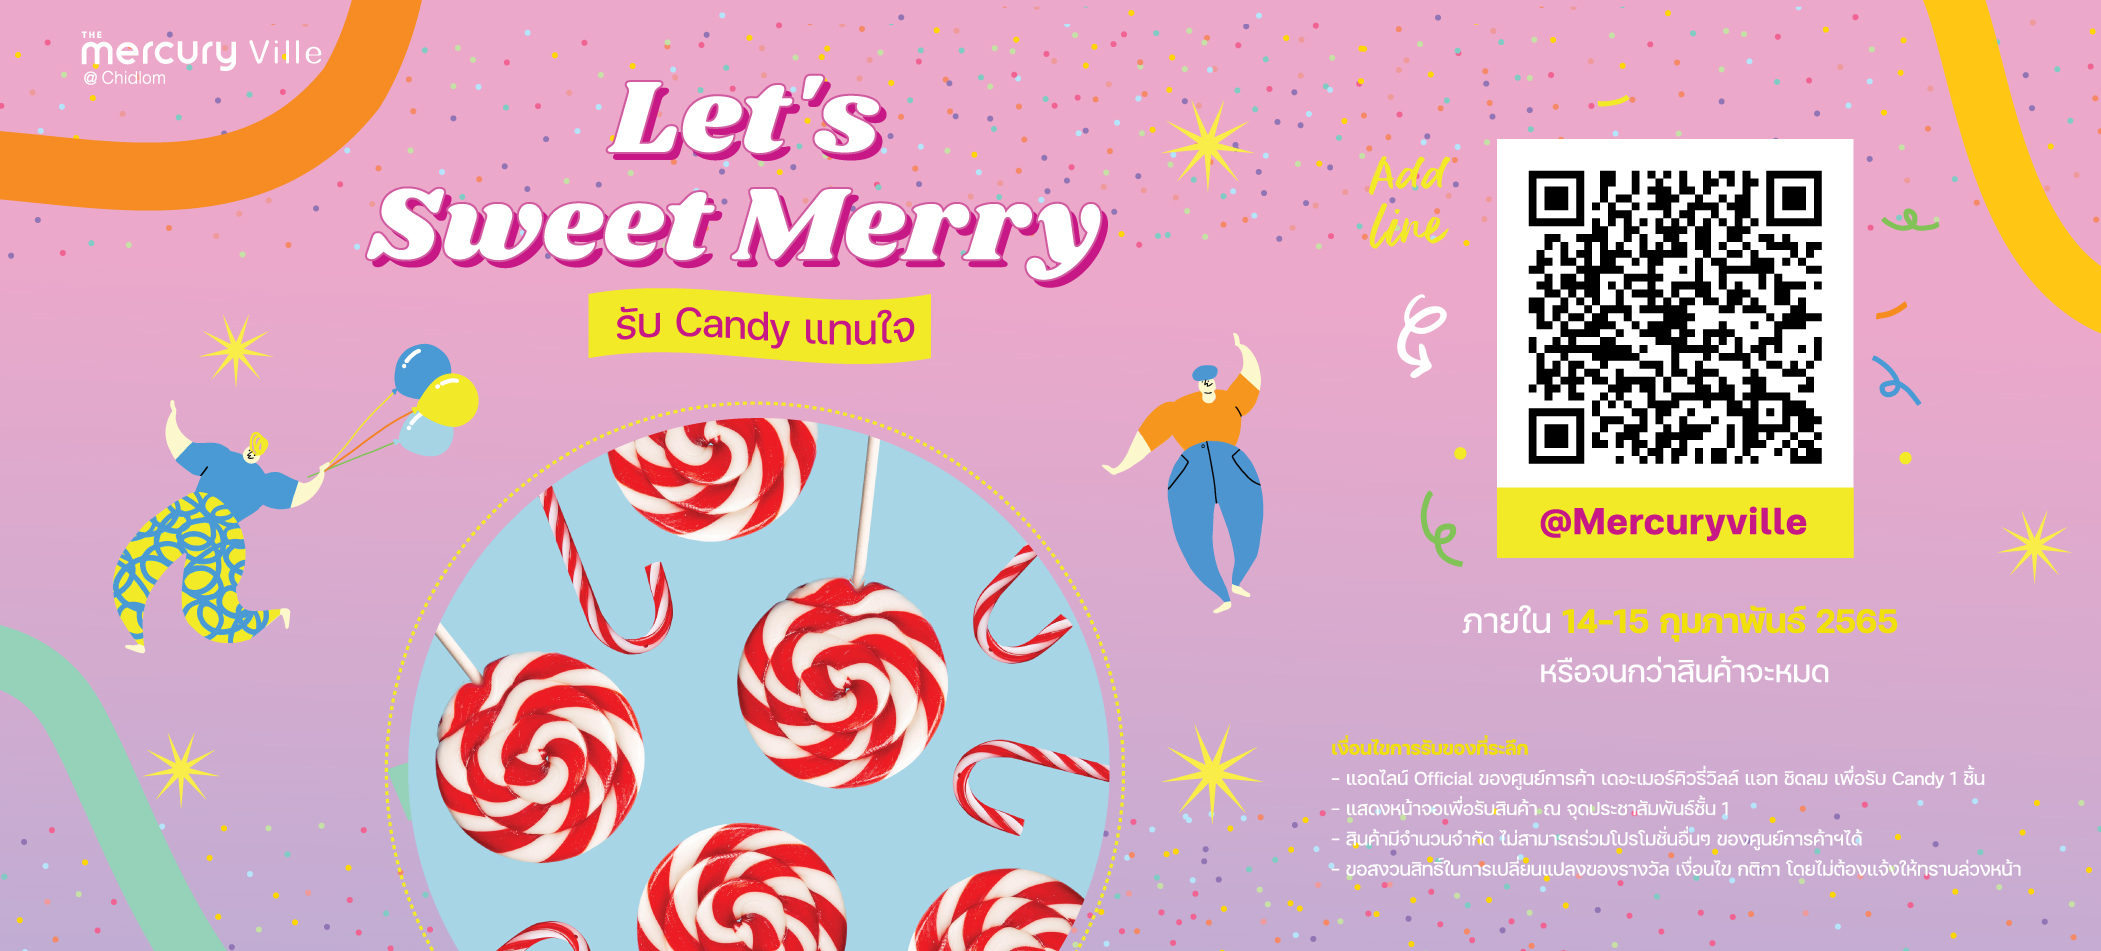 Campaign: Let’s Sweet Merry!! รับแคนดี้แทนใจ